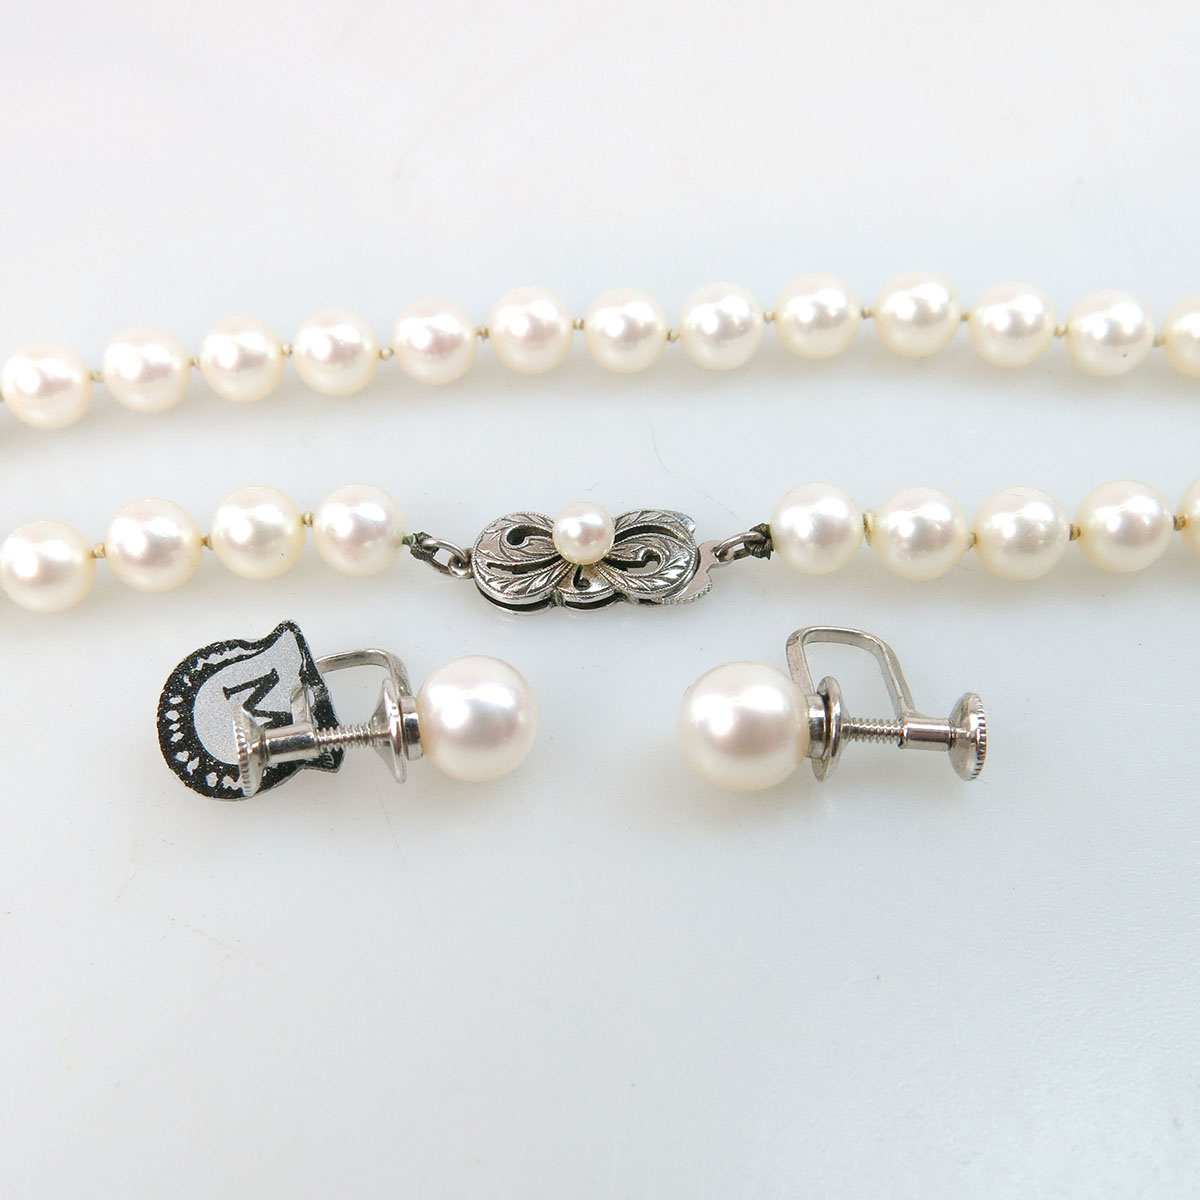 Mikimoto Cultured Pearl Necklace and Earrings